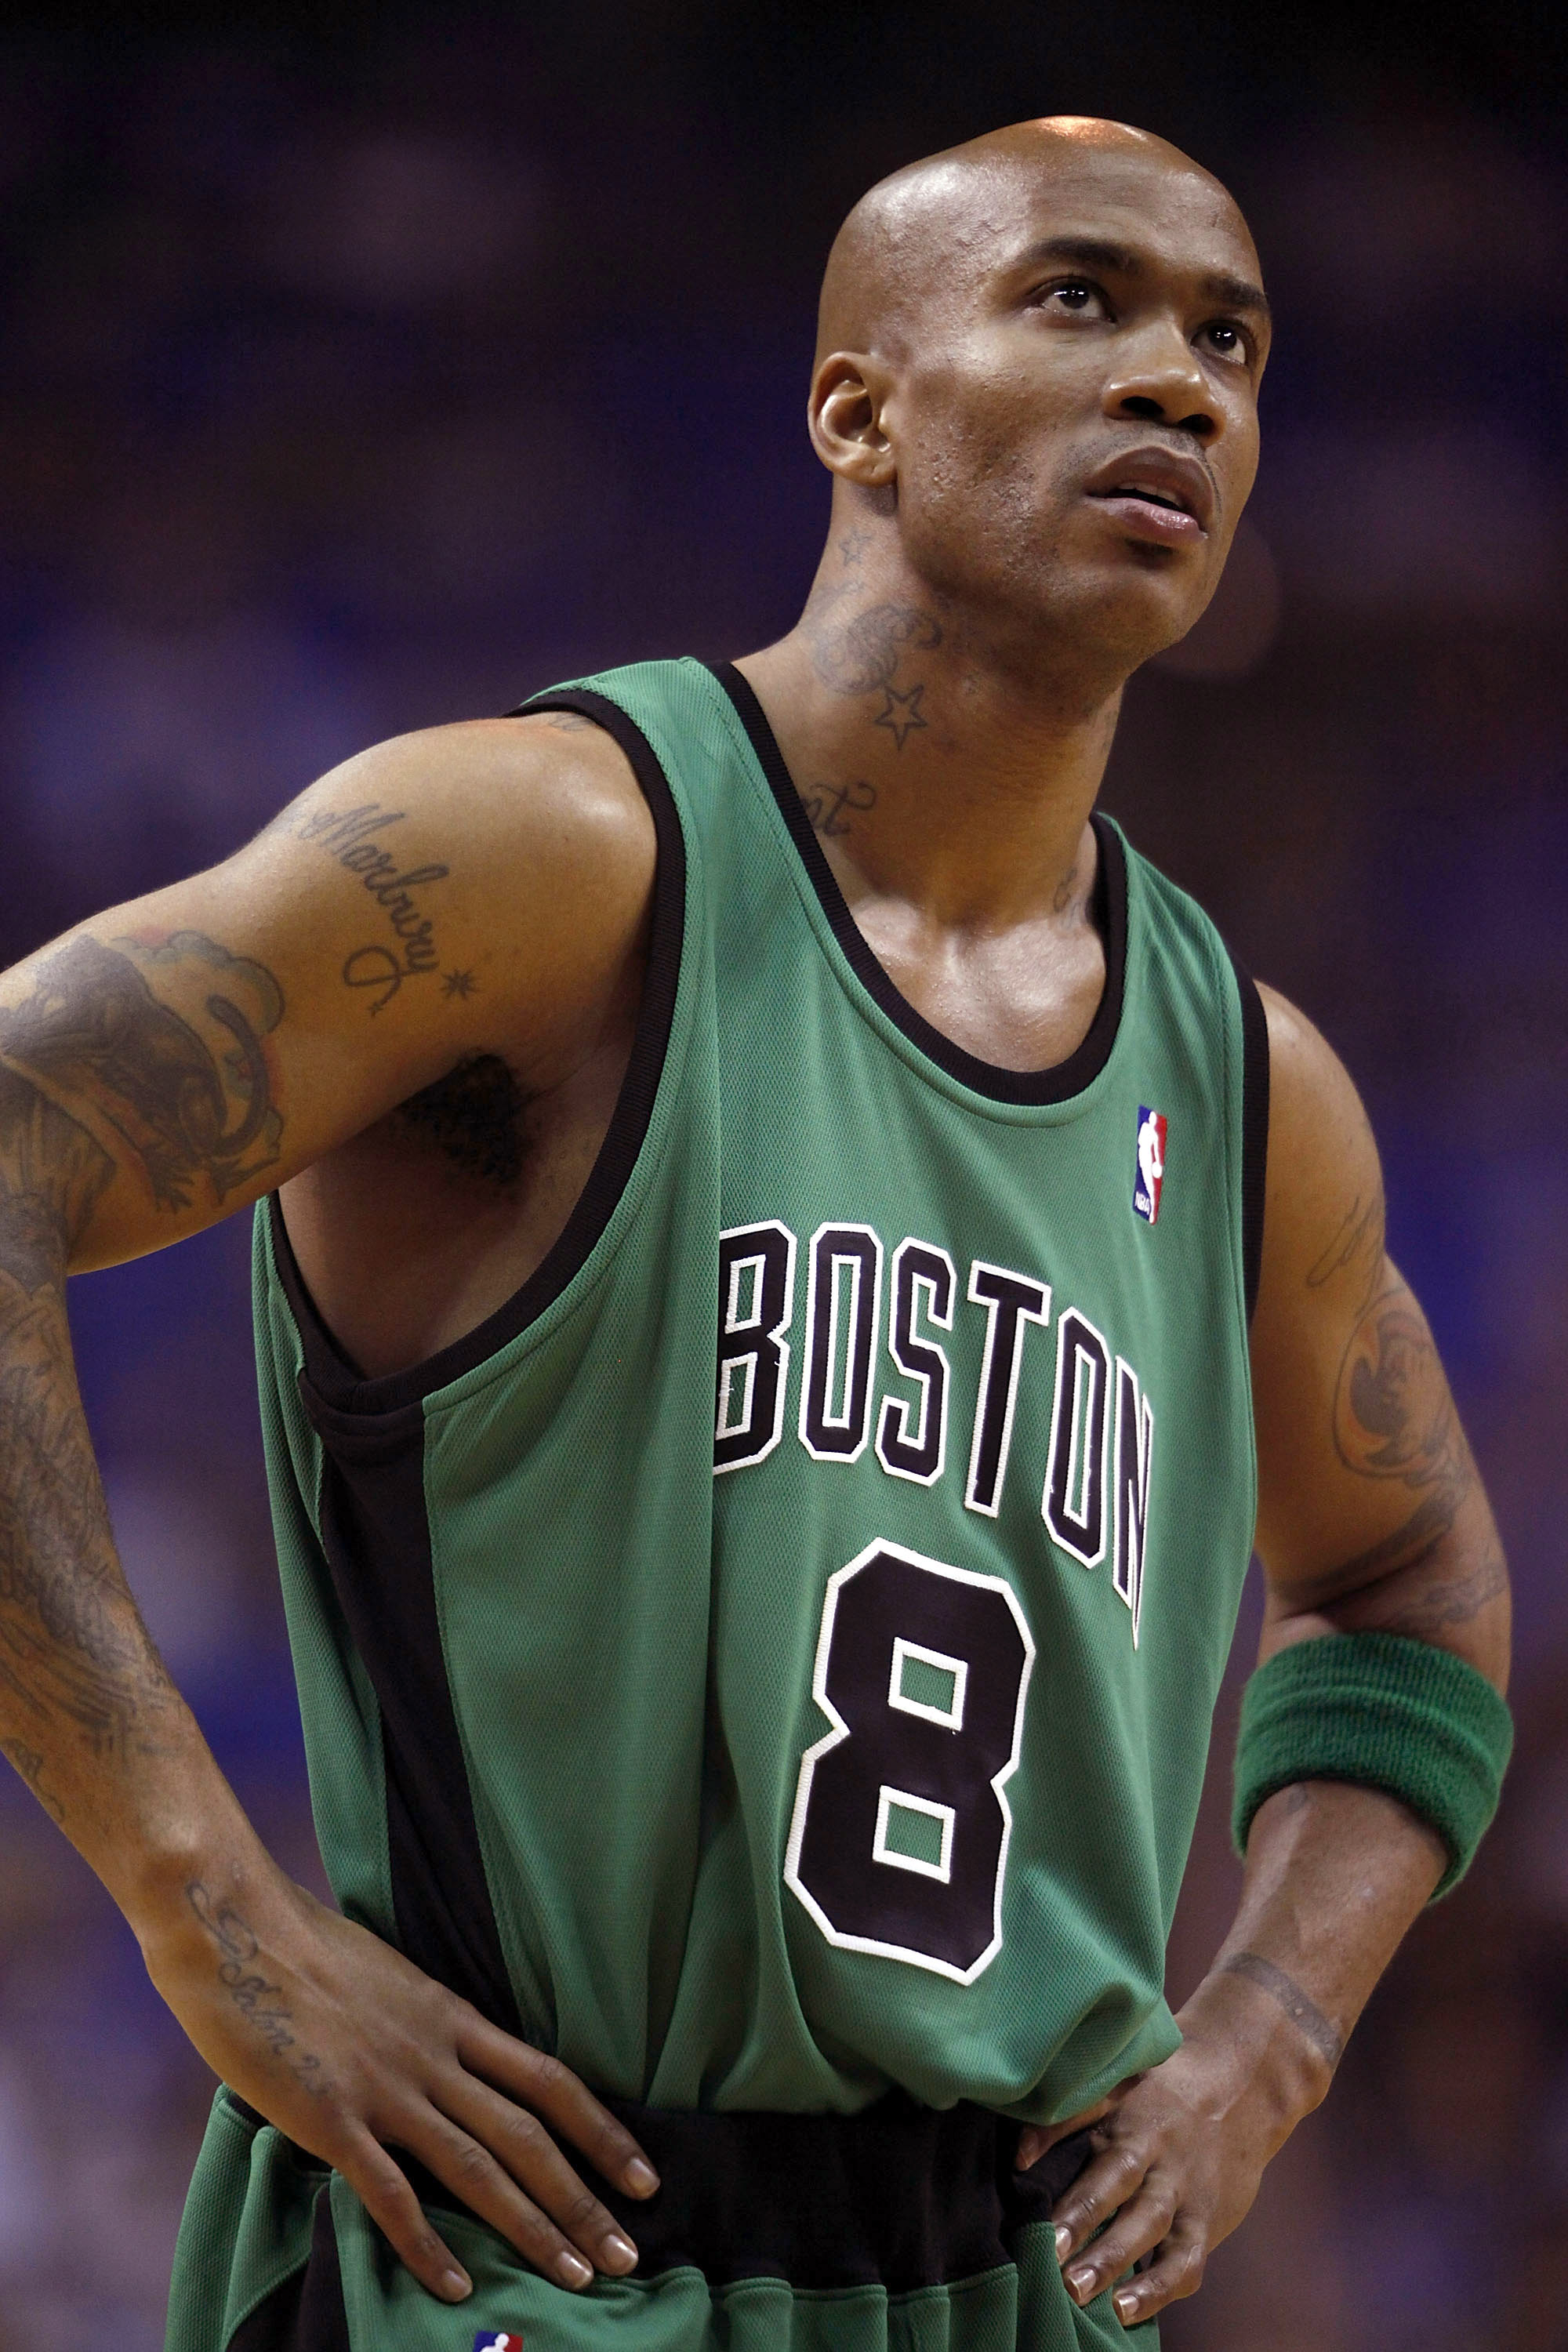 ORLANDO, FL - MAY 08:  Stephon Marbury #8 of the Boston Celtics reacts against the Orlando Magic in Game Three of the Eastern Conference Semifinals during the 2009 NBA Playoffs at Amway Arena on May 8, 2009 in Orlando, Florida. The Magic defeated the Celt